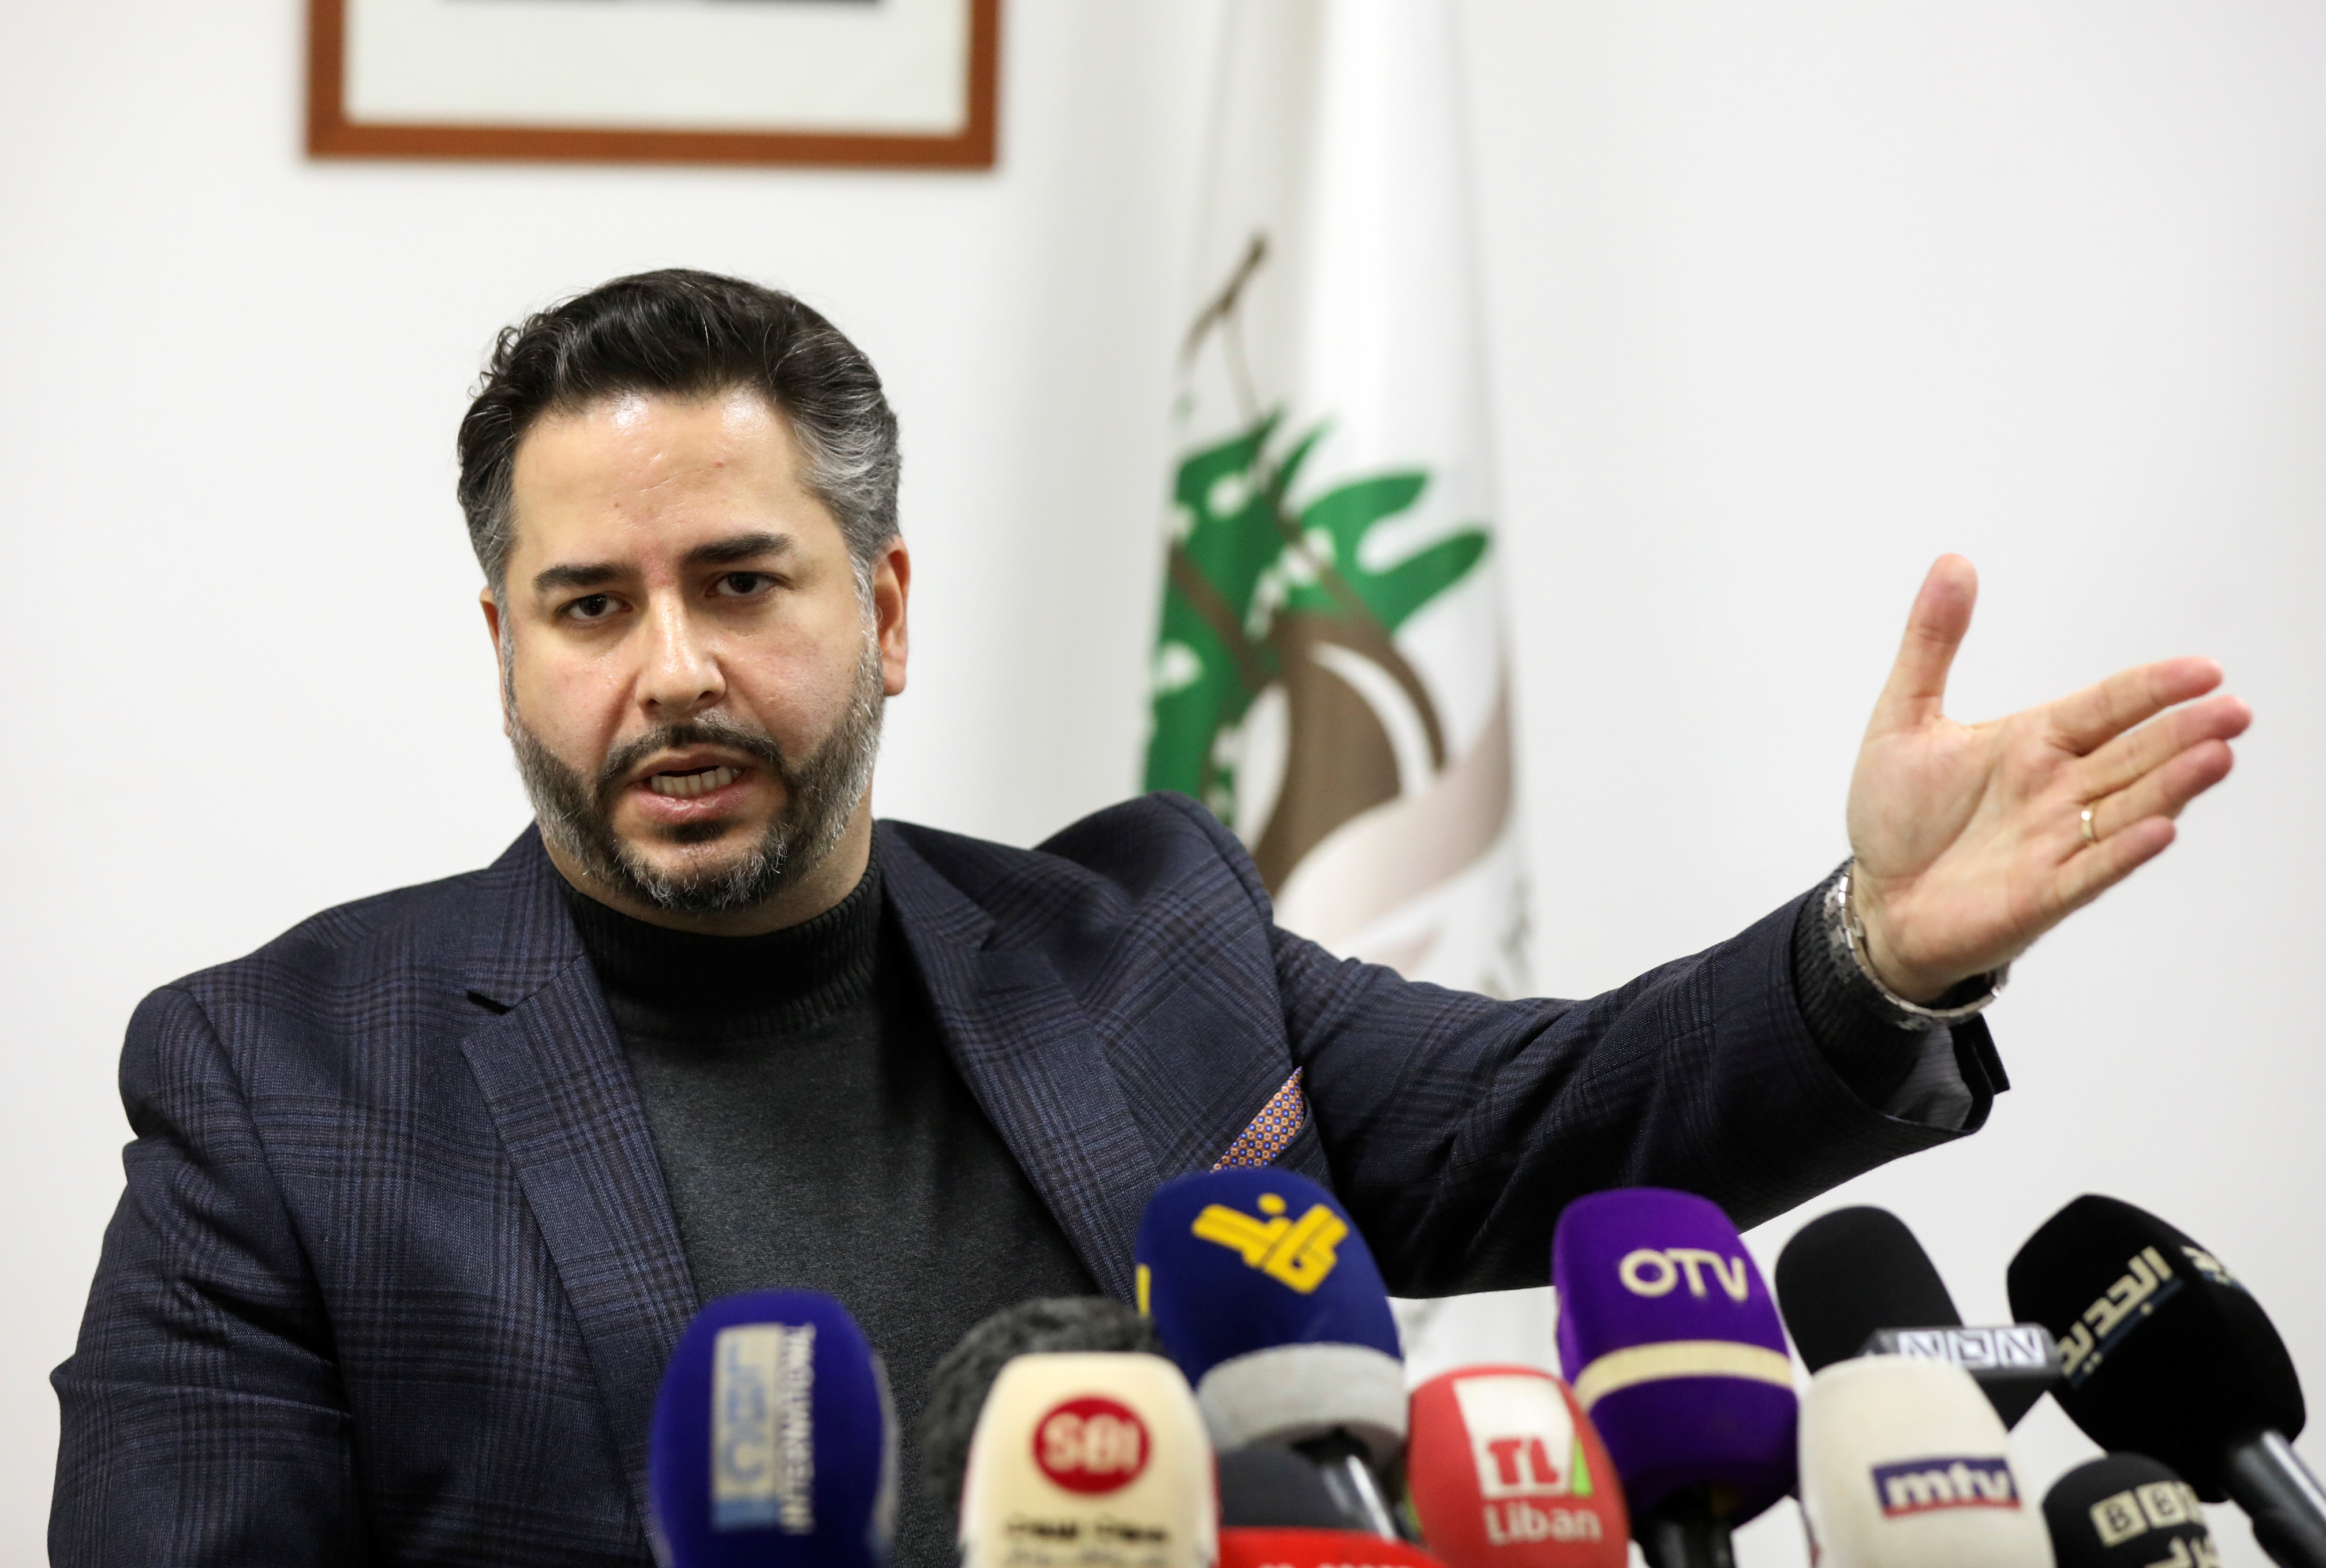 Lebanon's Economy Minister Amin Salam gestures as he speaks during a news conference in Beirut